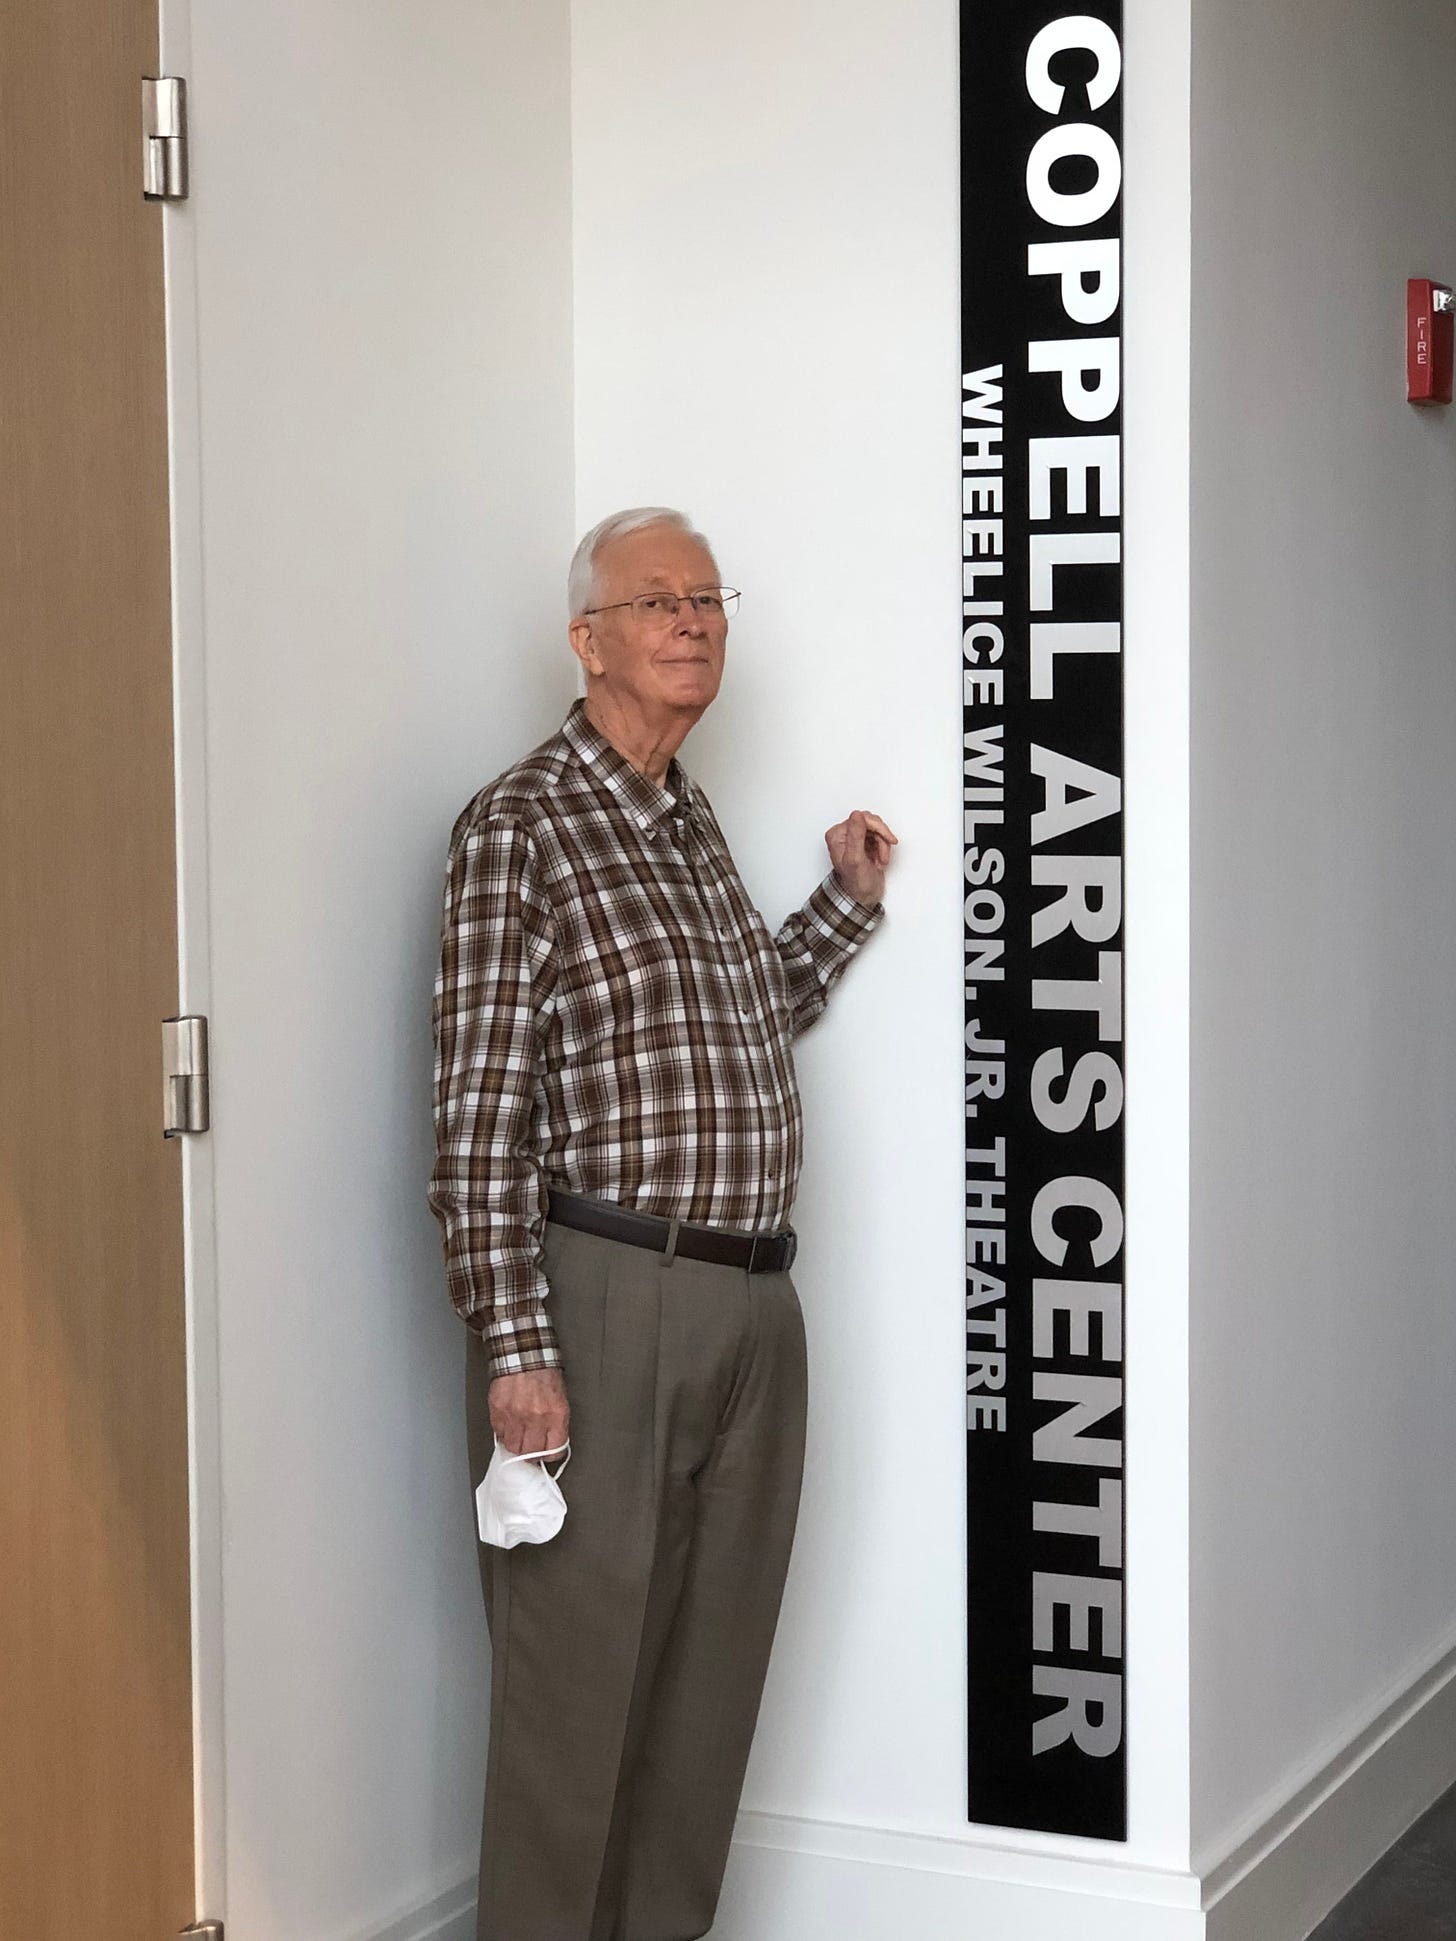 Wheelice Wilson Jr. standing next to a sign bearing his name at the Coppell Arts Center